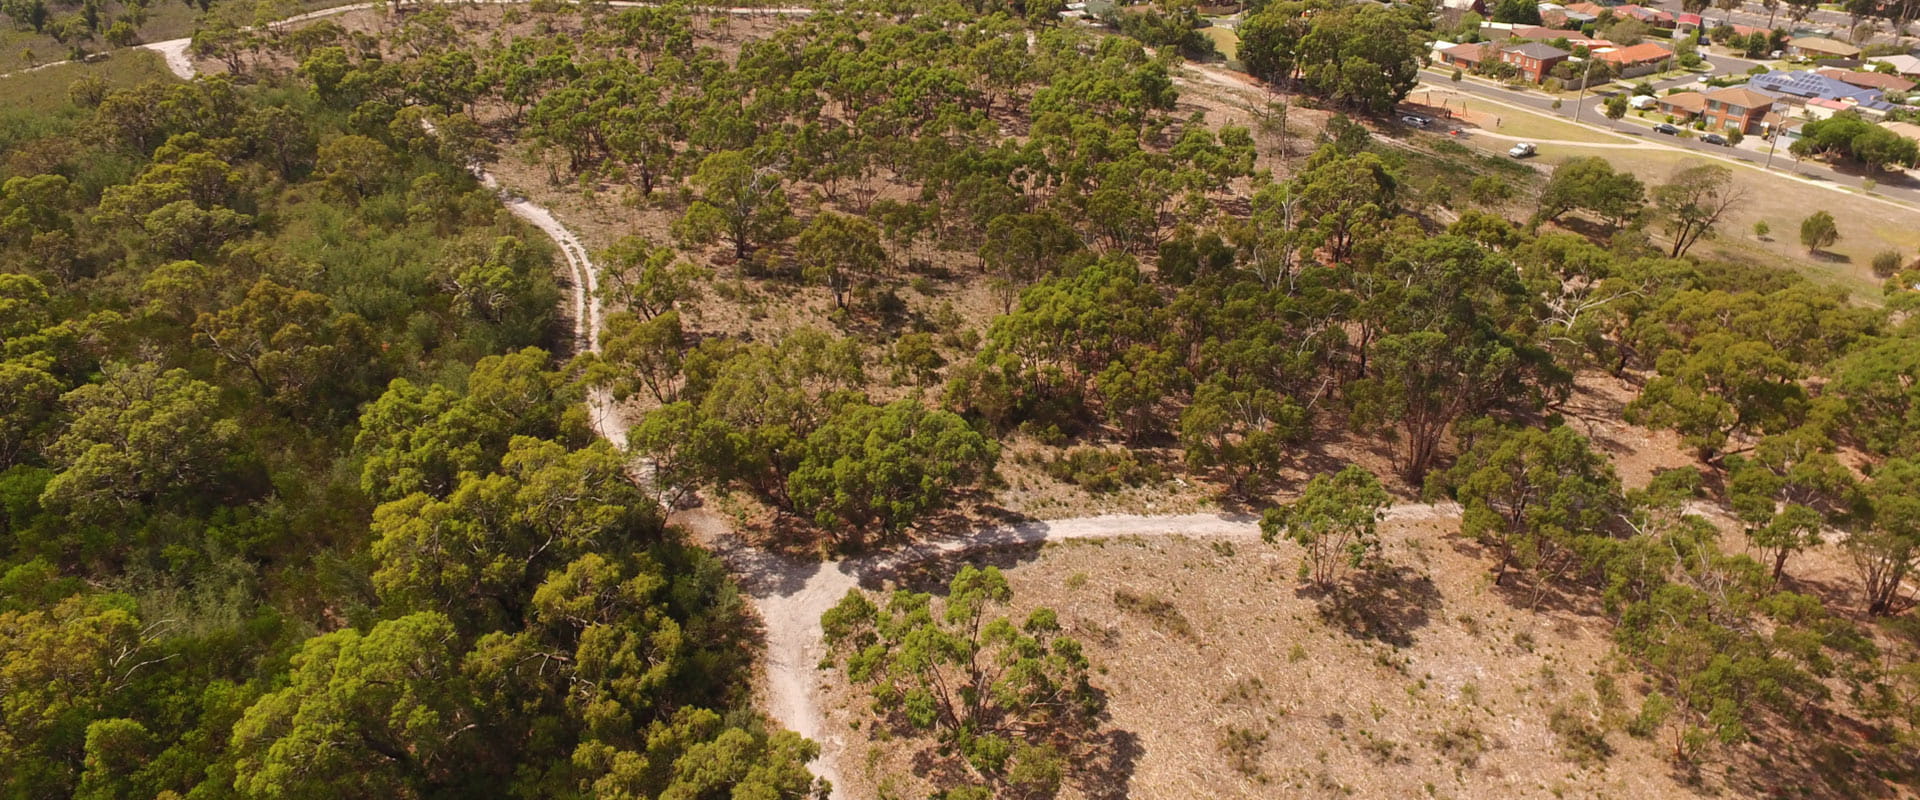 An Aerial view that looks down at dirt covered trails and rigged bushland on the edge of suburban streets